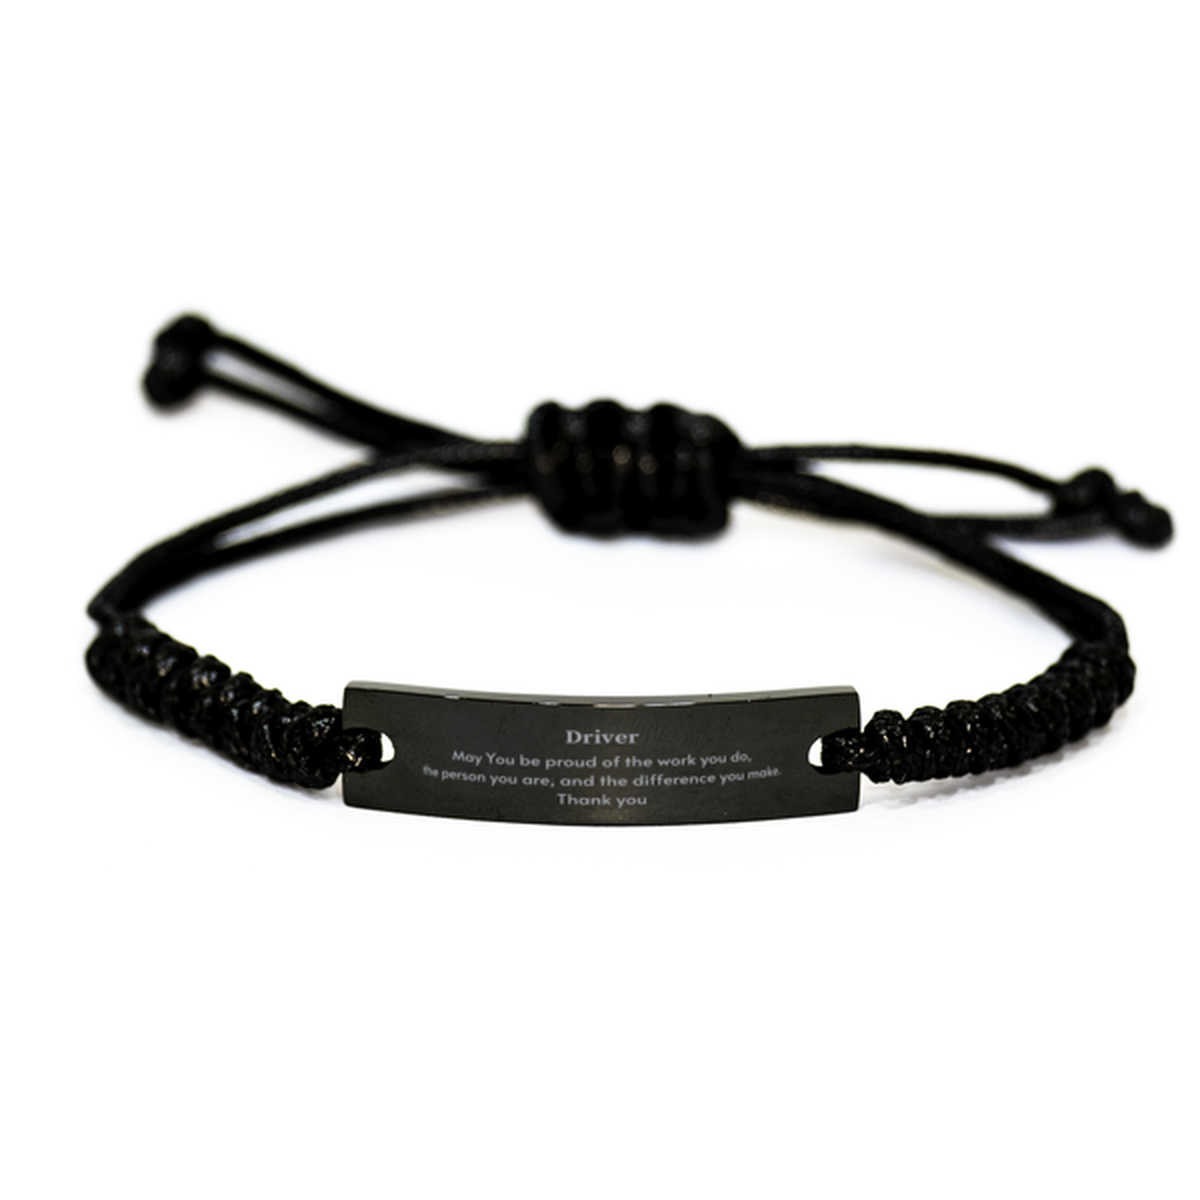 Heartwarming Black Rope Bracelet Retirement Coworkers Gifts for Driver, Driver May You be proud of the work you do, the person you are Gifts for Boss Men Women Friends